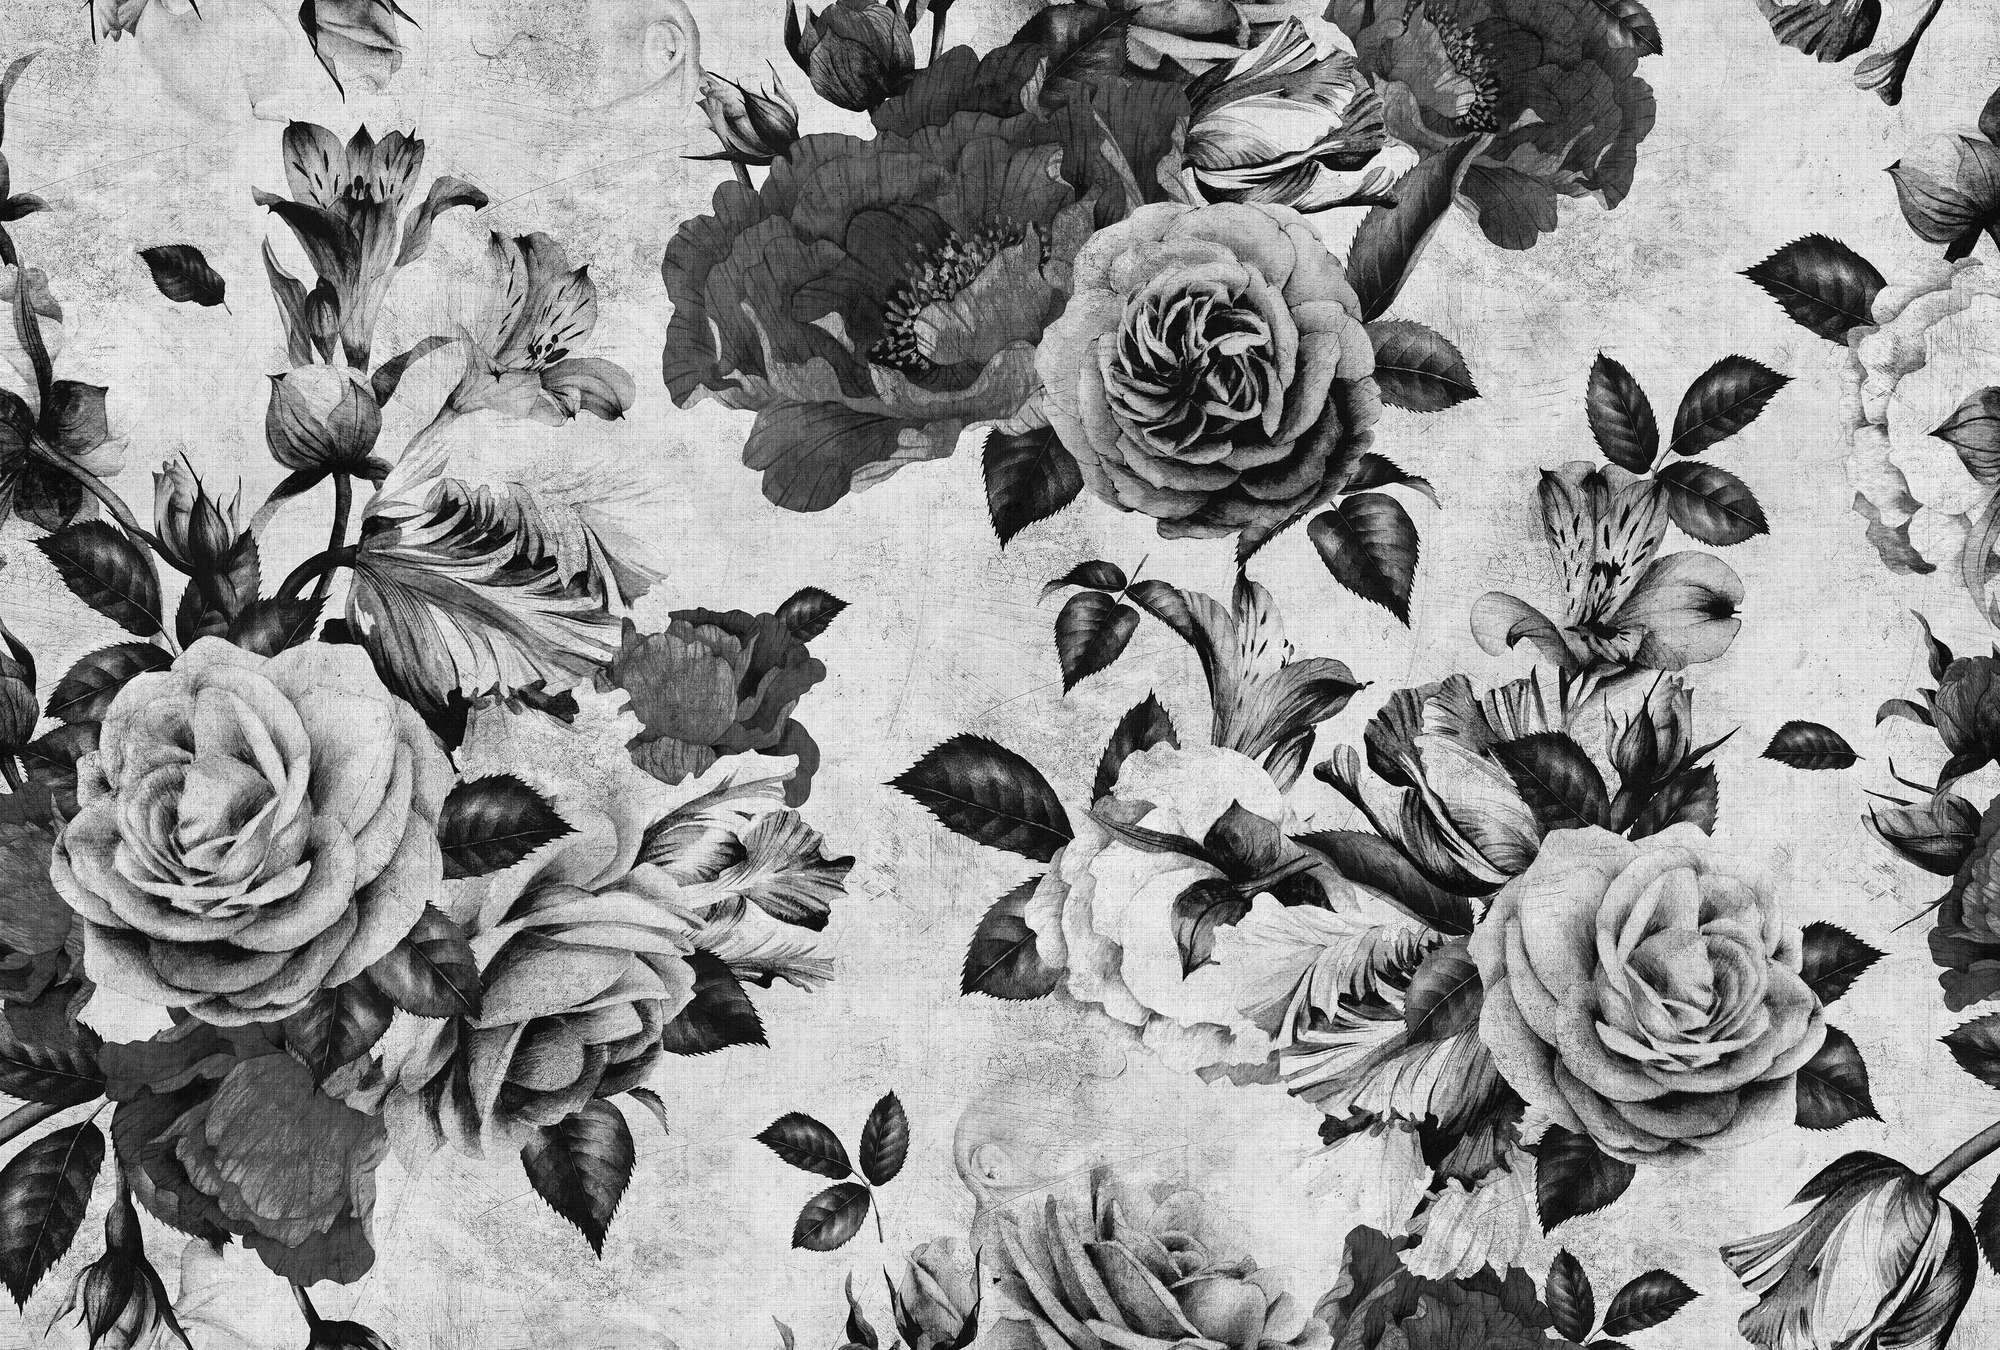             Spanish rose 1 - Rose wallpaper with black and white flowers in natural linen structure - Grey, Black | Premium smooth fleece
        